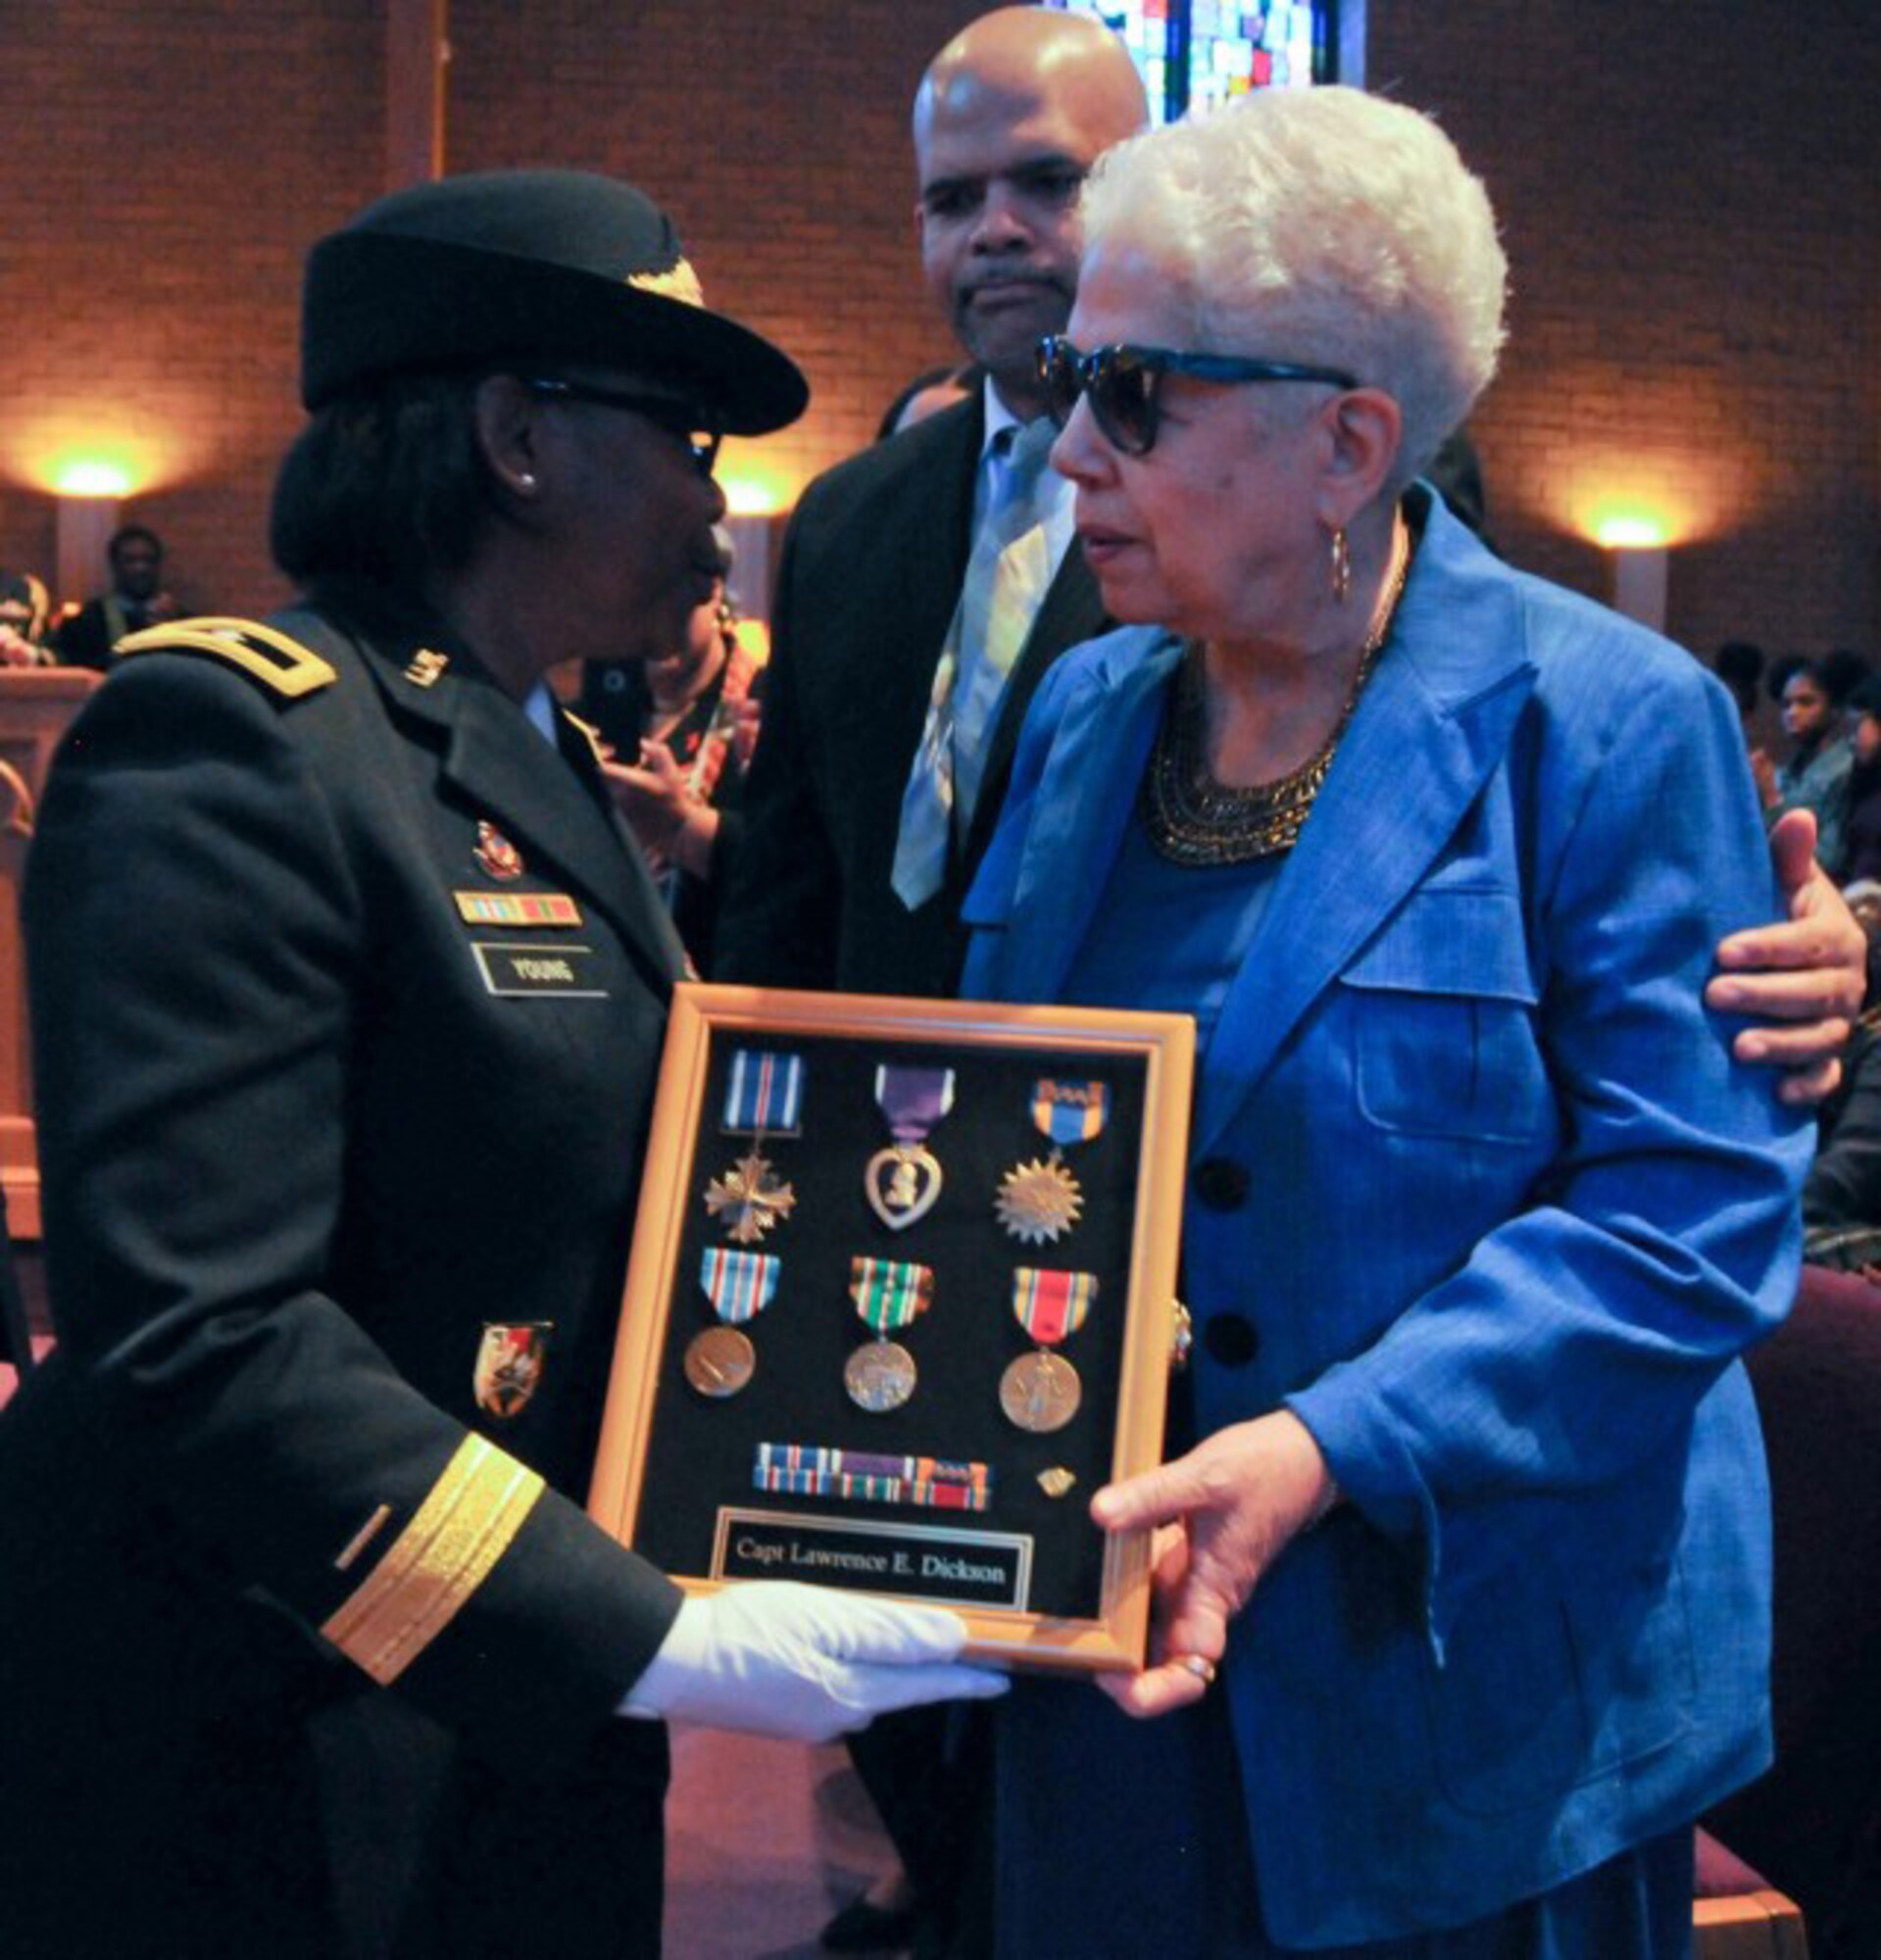 Marla L. Andrews (right), daughter of U.S. Army Air Forces Capt. Lawrence E. Dickson, receives her father's medals from Brig. Gen. Twanda E. Young, deputy commanding general of the U.S. Army's Human Resources Command, during a Feb. 24, 2019 ceremony held in Summit, New Jersey.